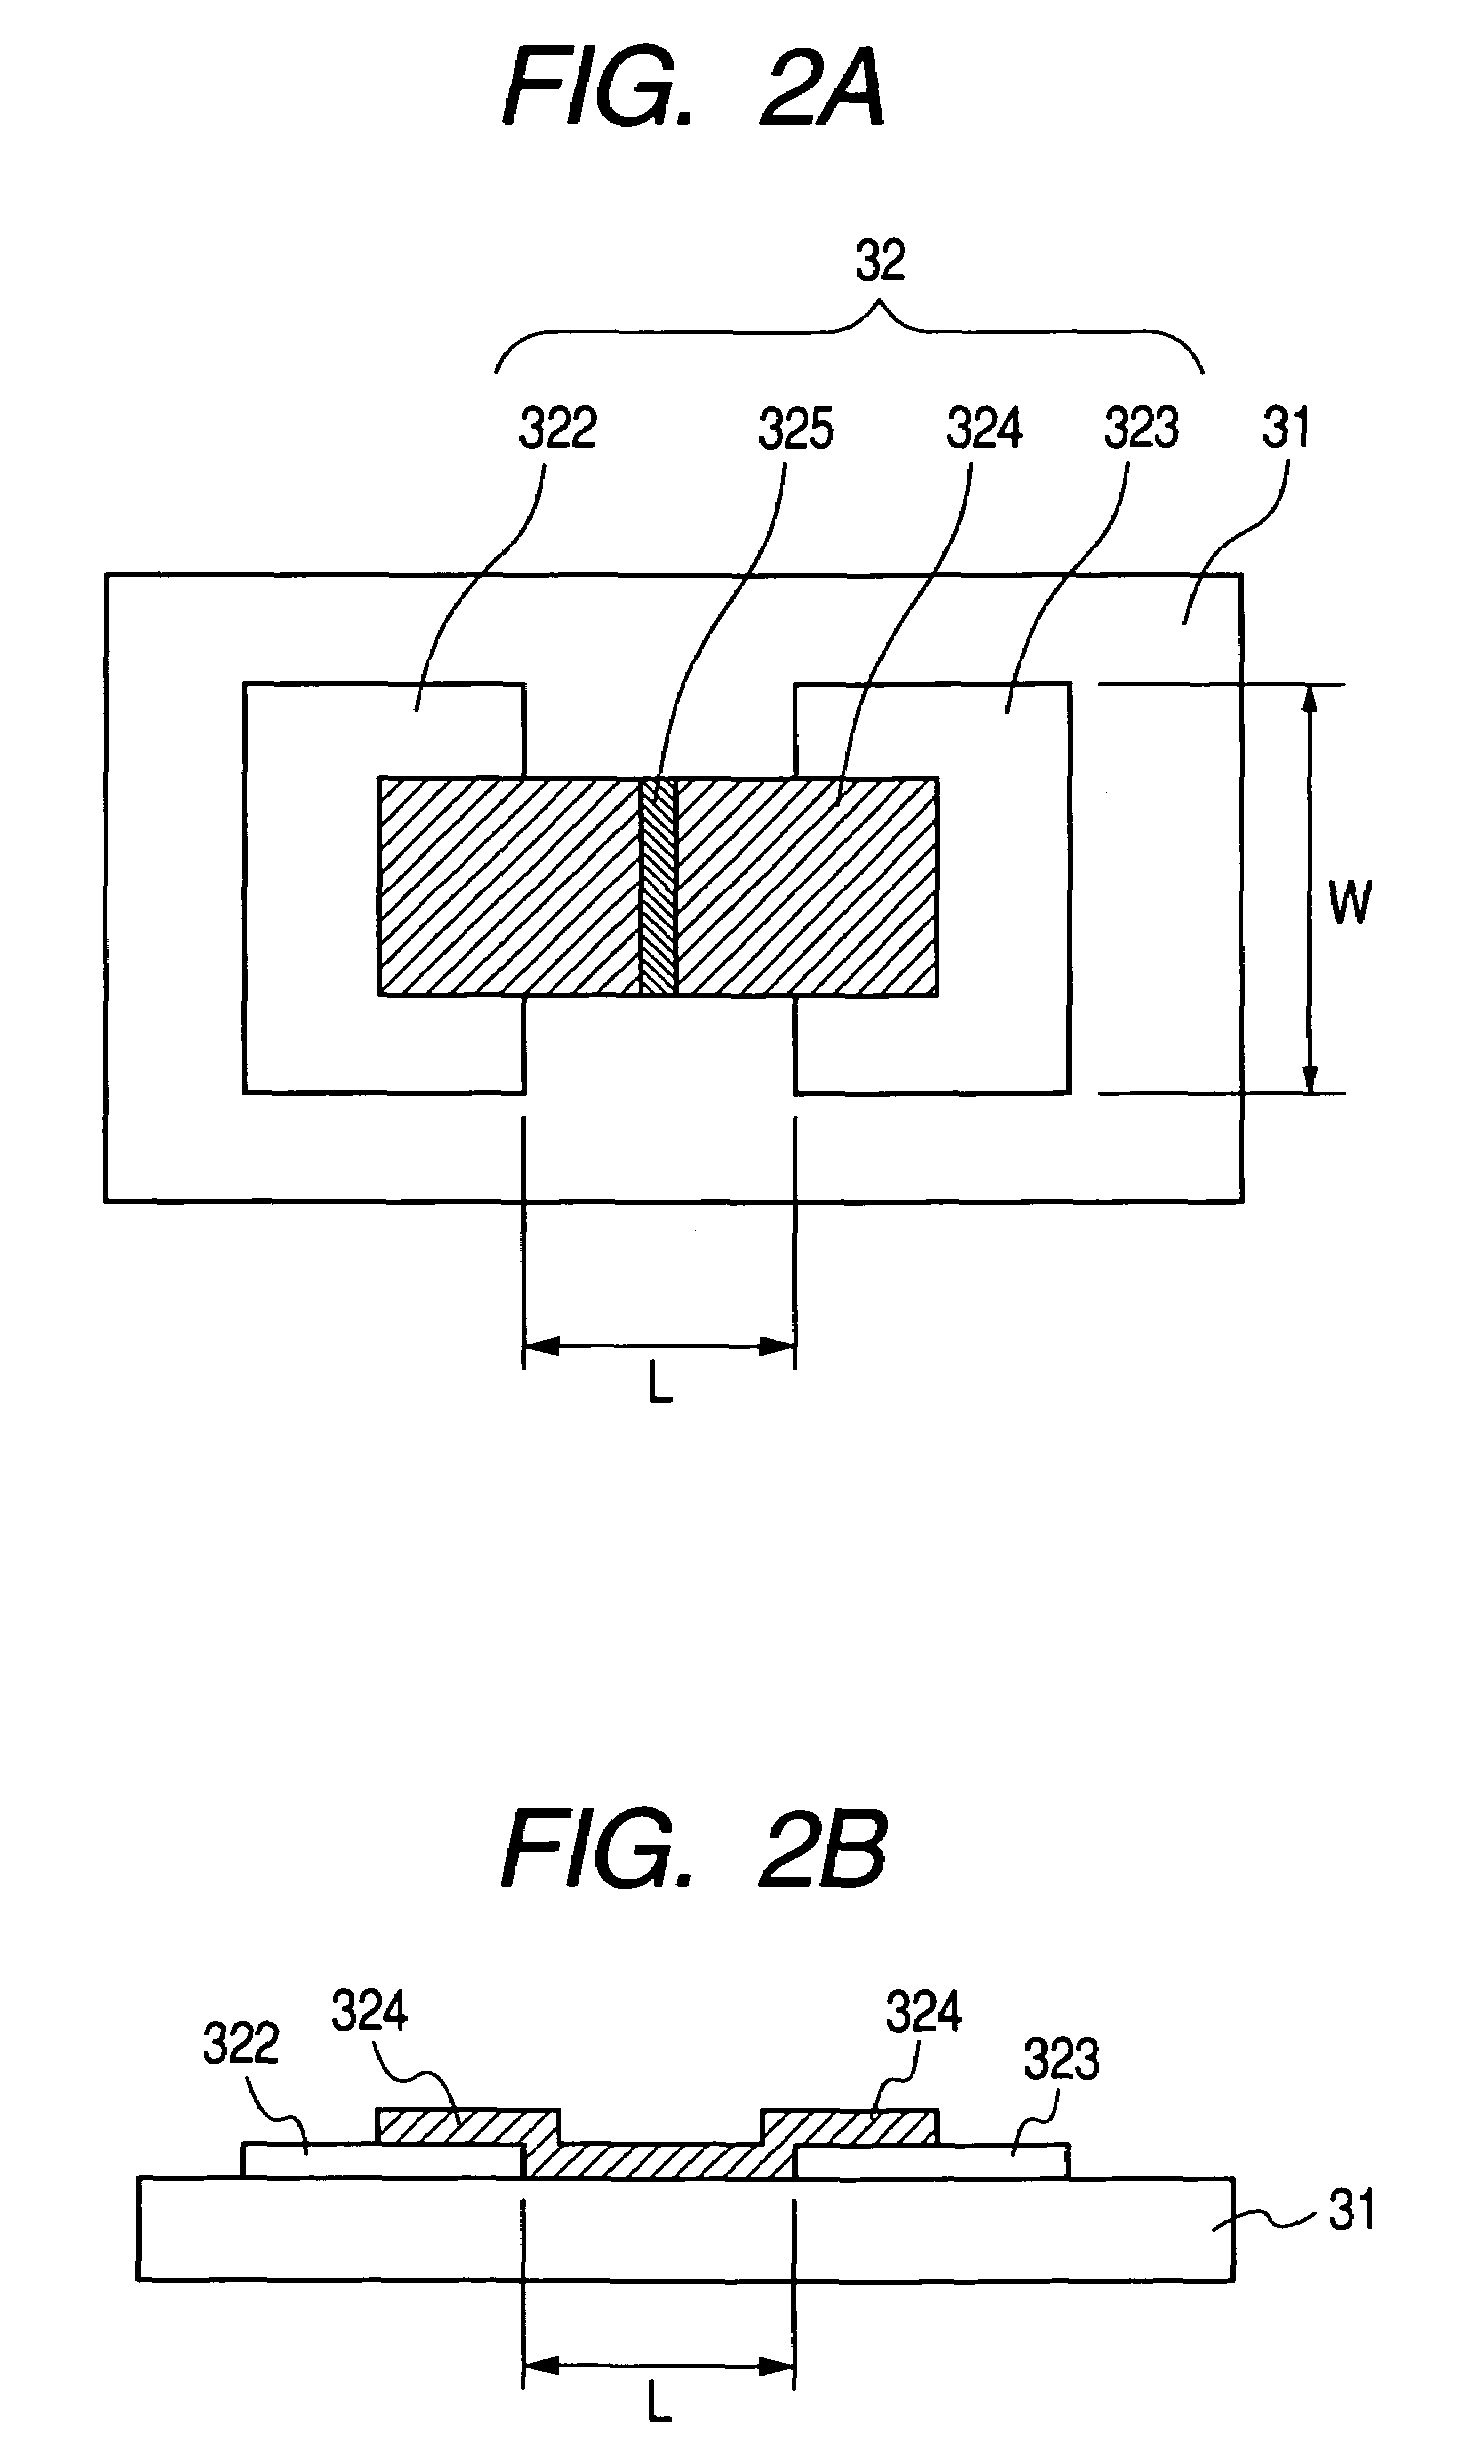 Method for fabricating envelope and method for fabricating image display apparatus